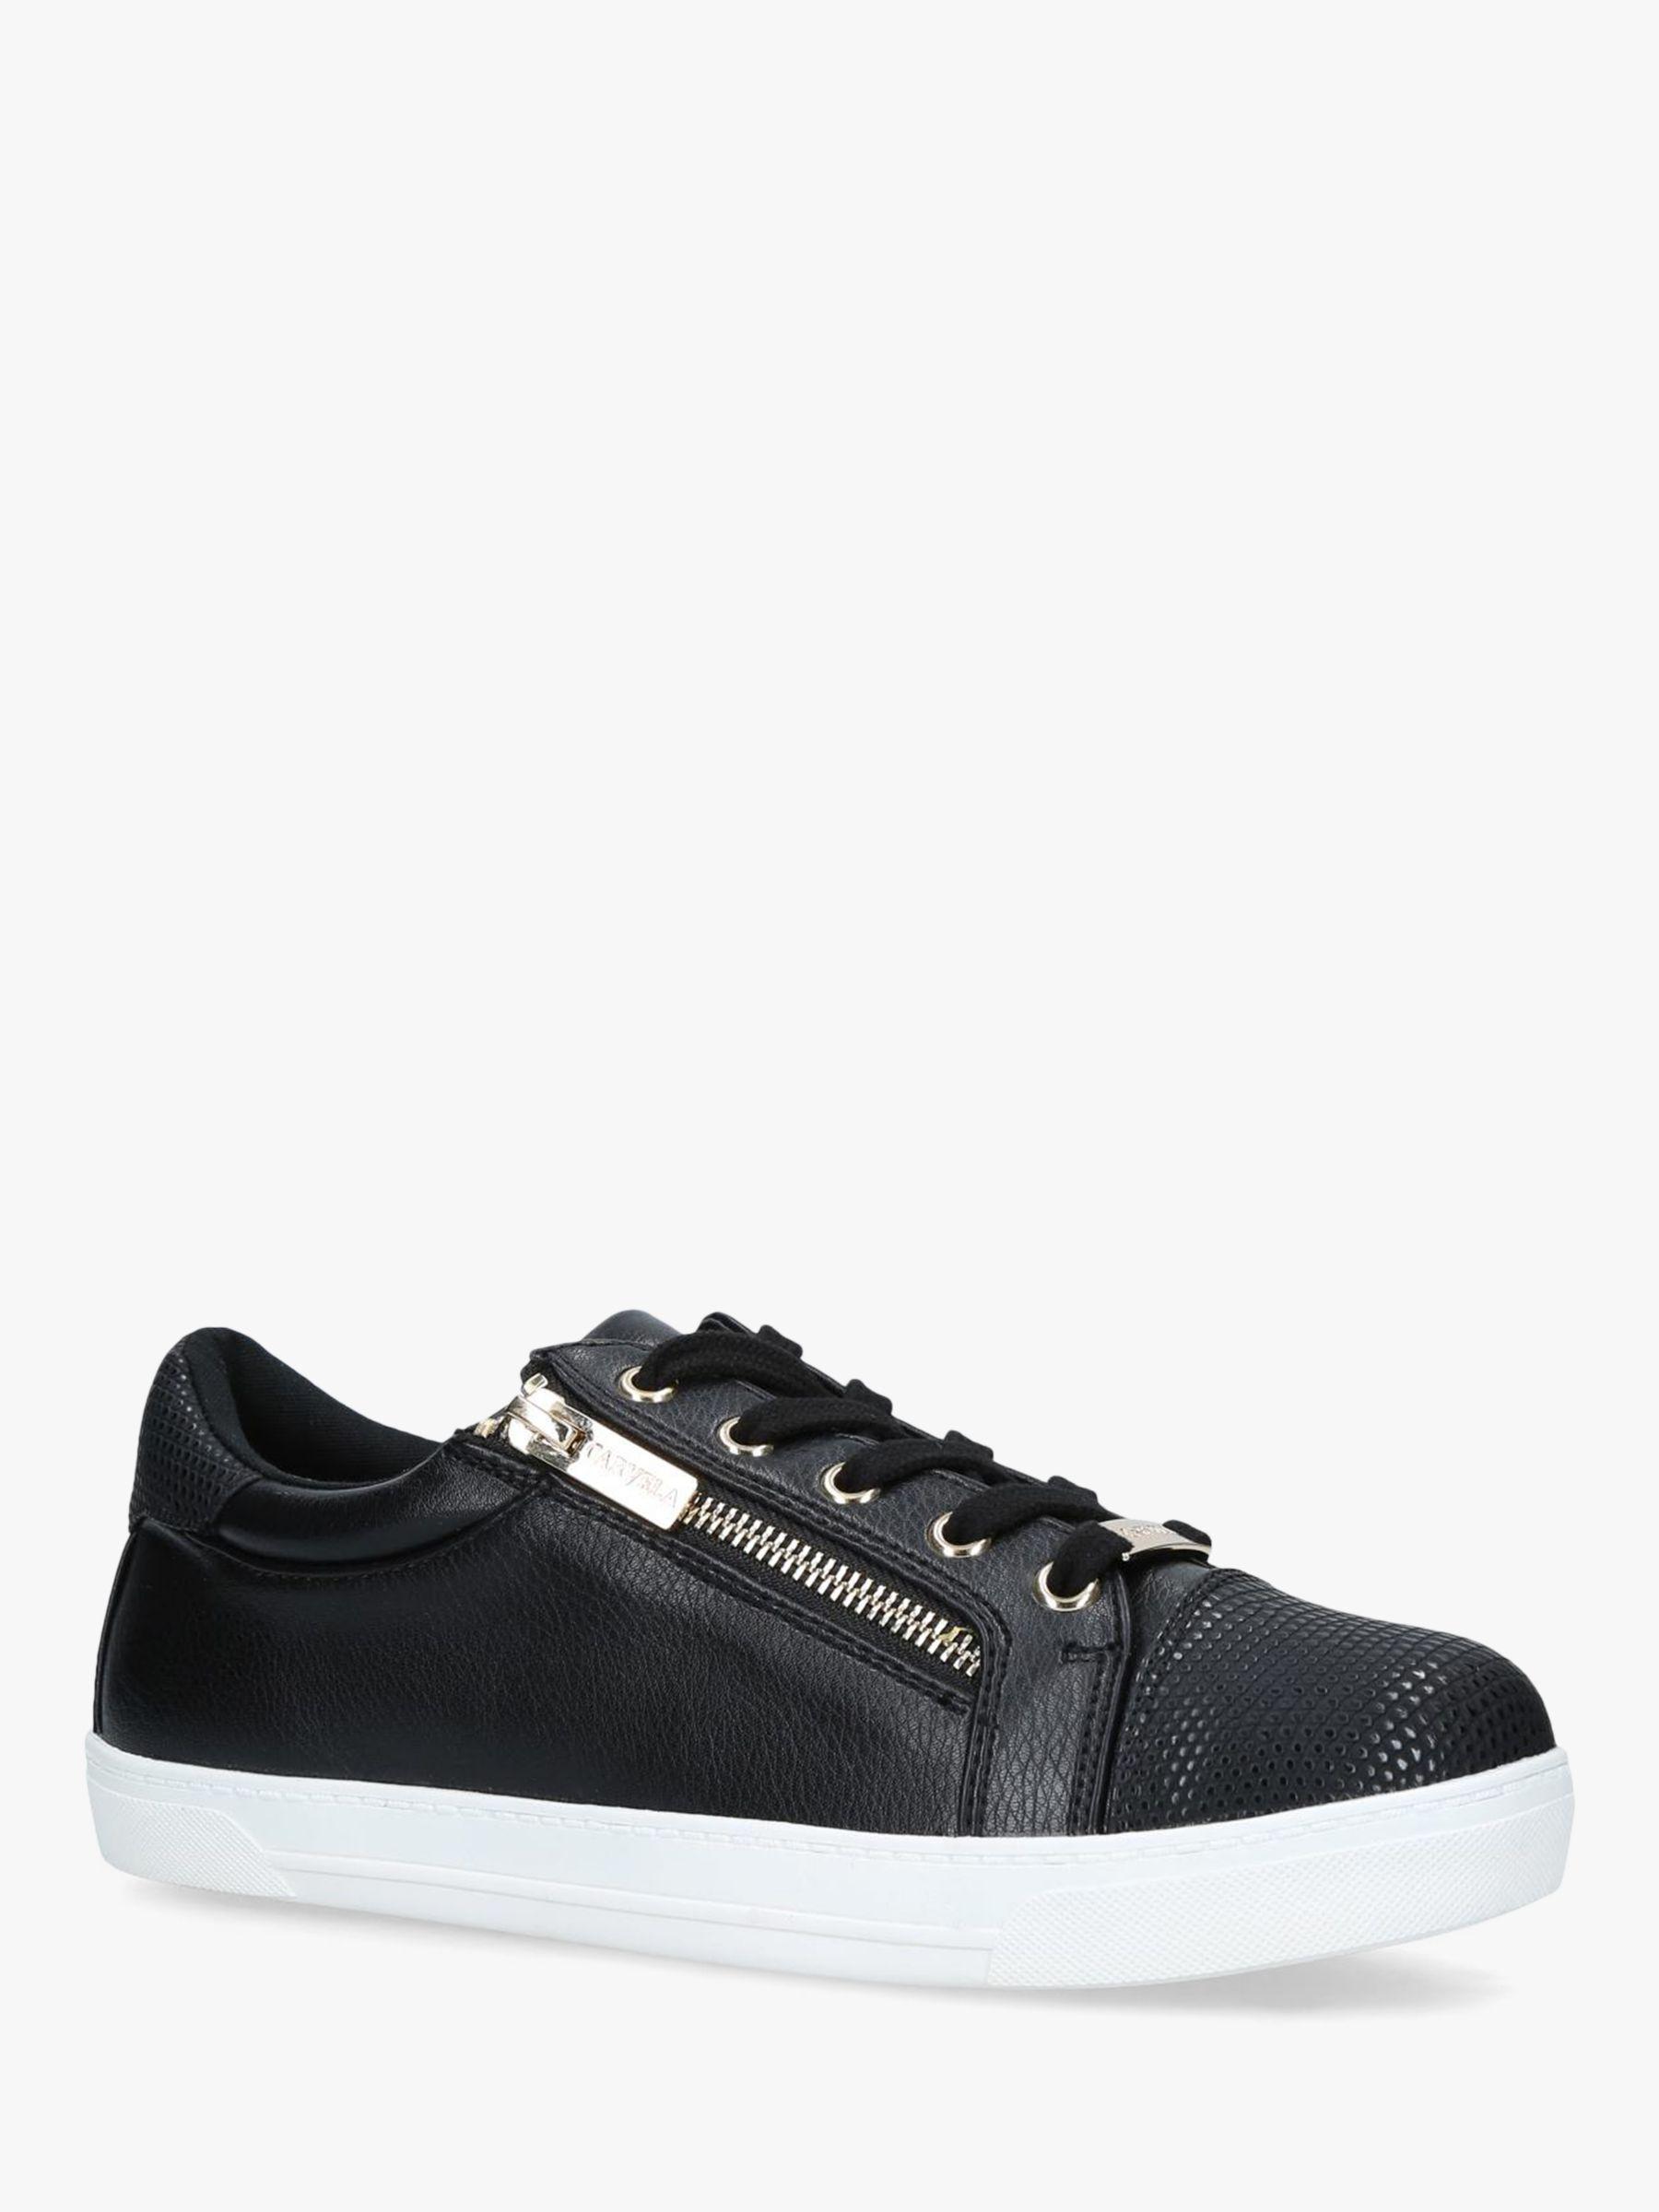 Carvela Kurt Geiger Jagged Zip-detail Faux-leather Trainers in Black - Lyst